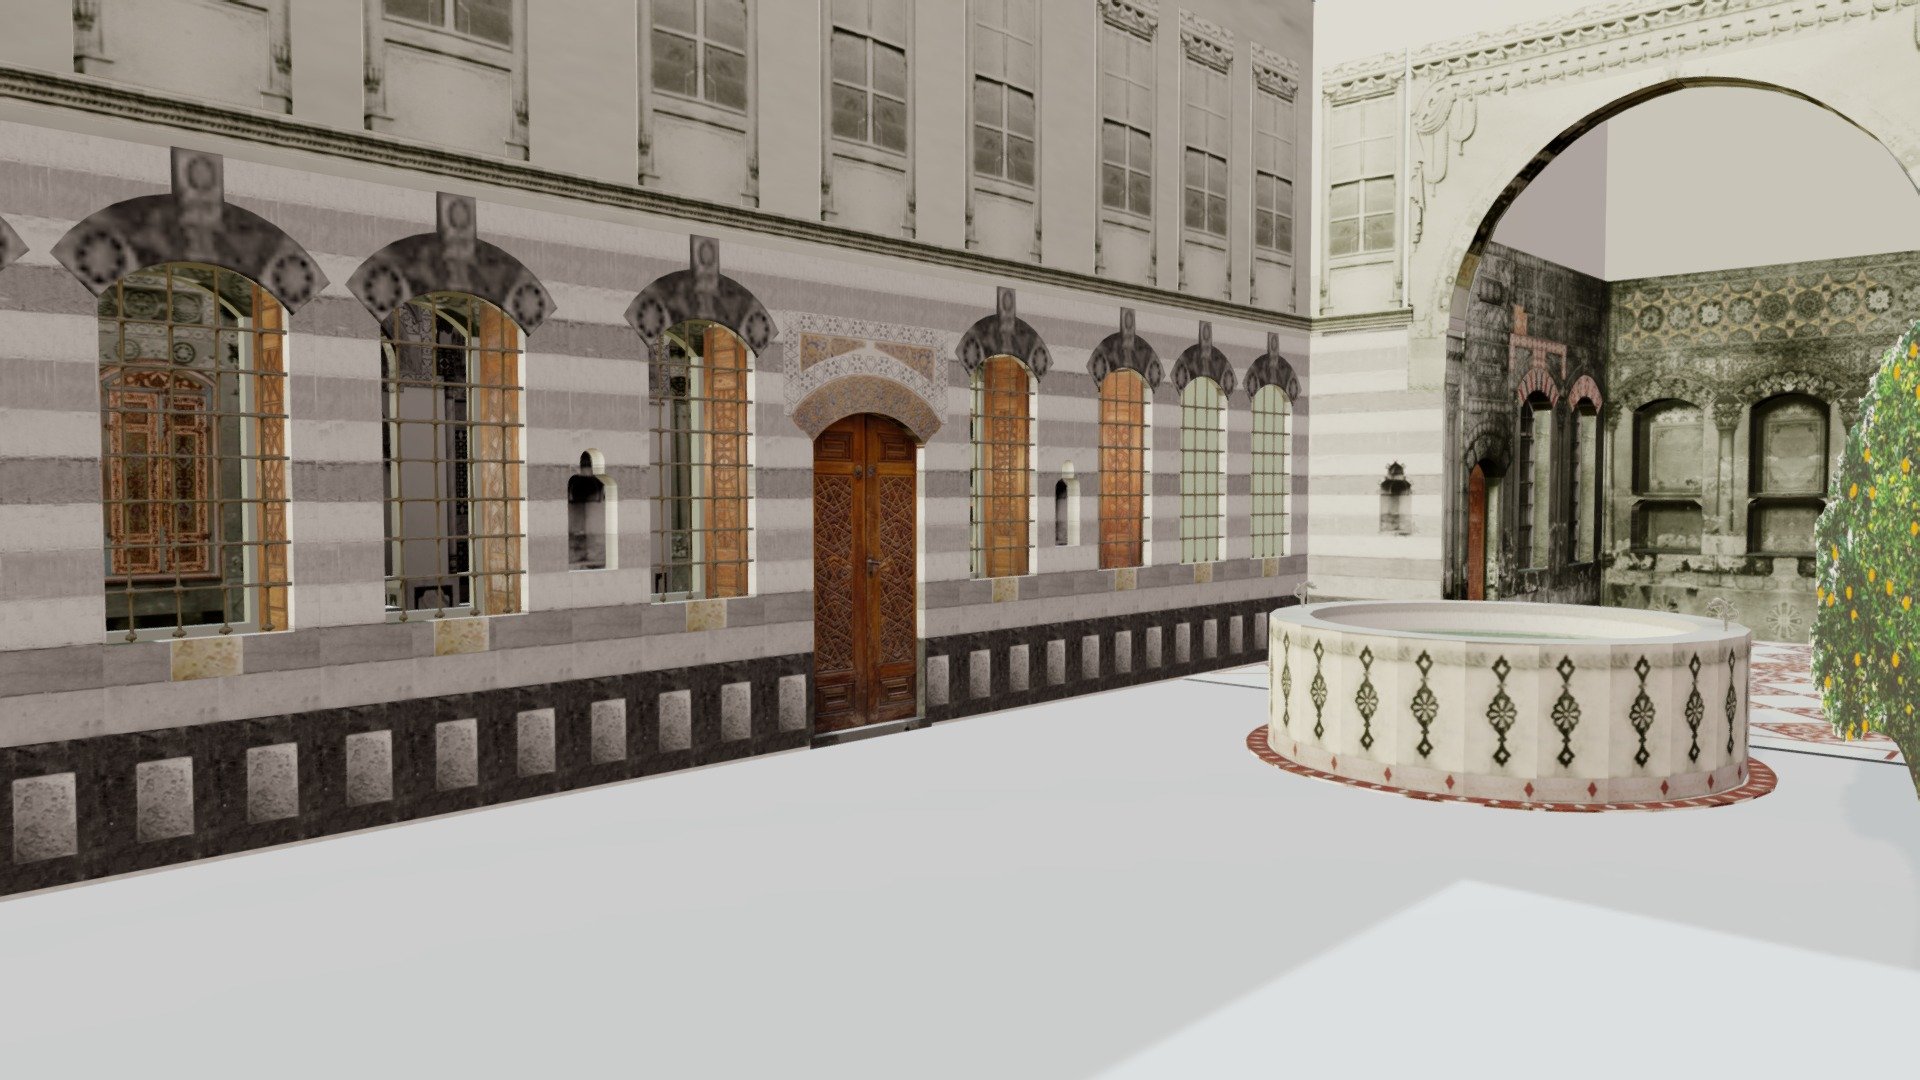 This model reconstructs the courtyard and reception room of a late-Ottoman Damascene residence. Images in color indicate elements now in the collection at Shangri La 3d model